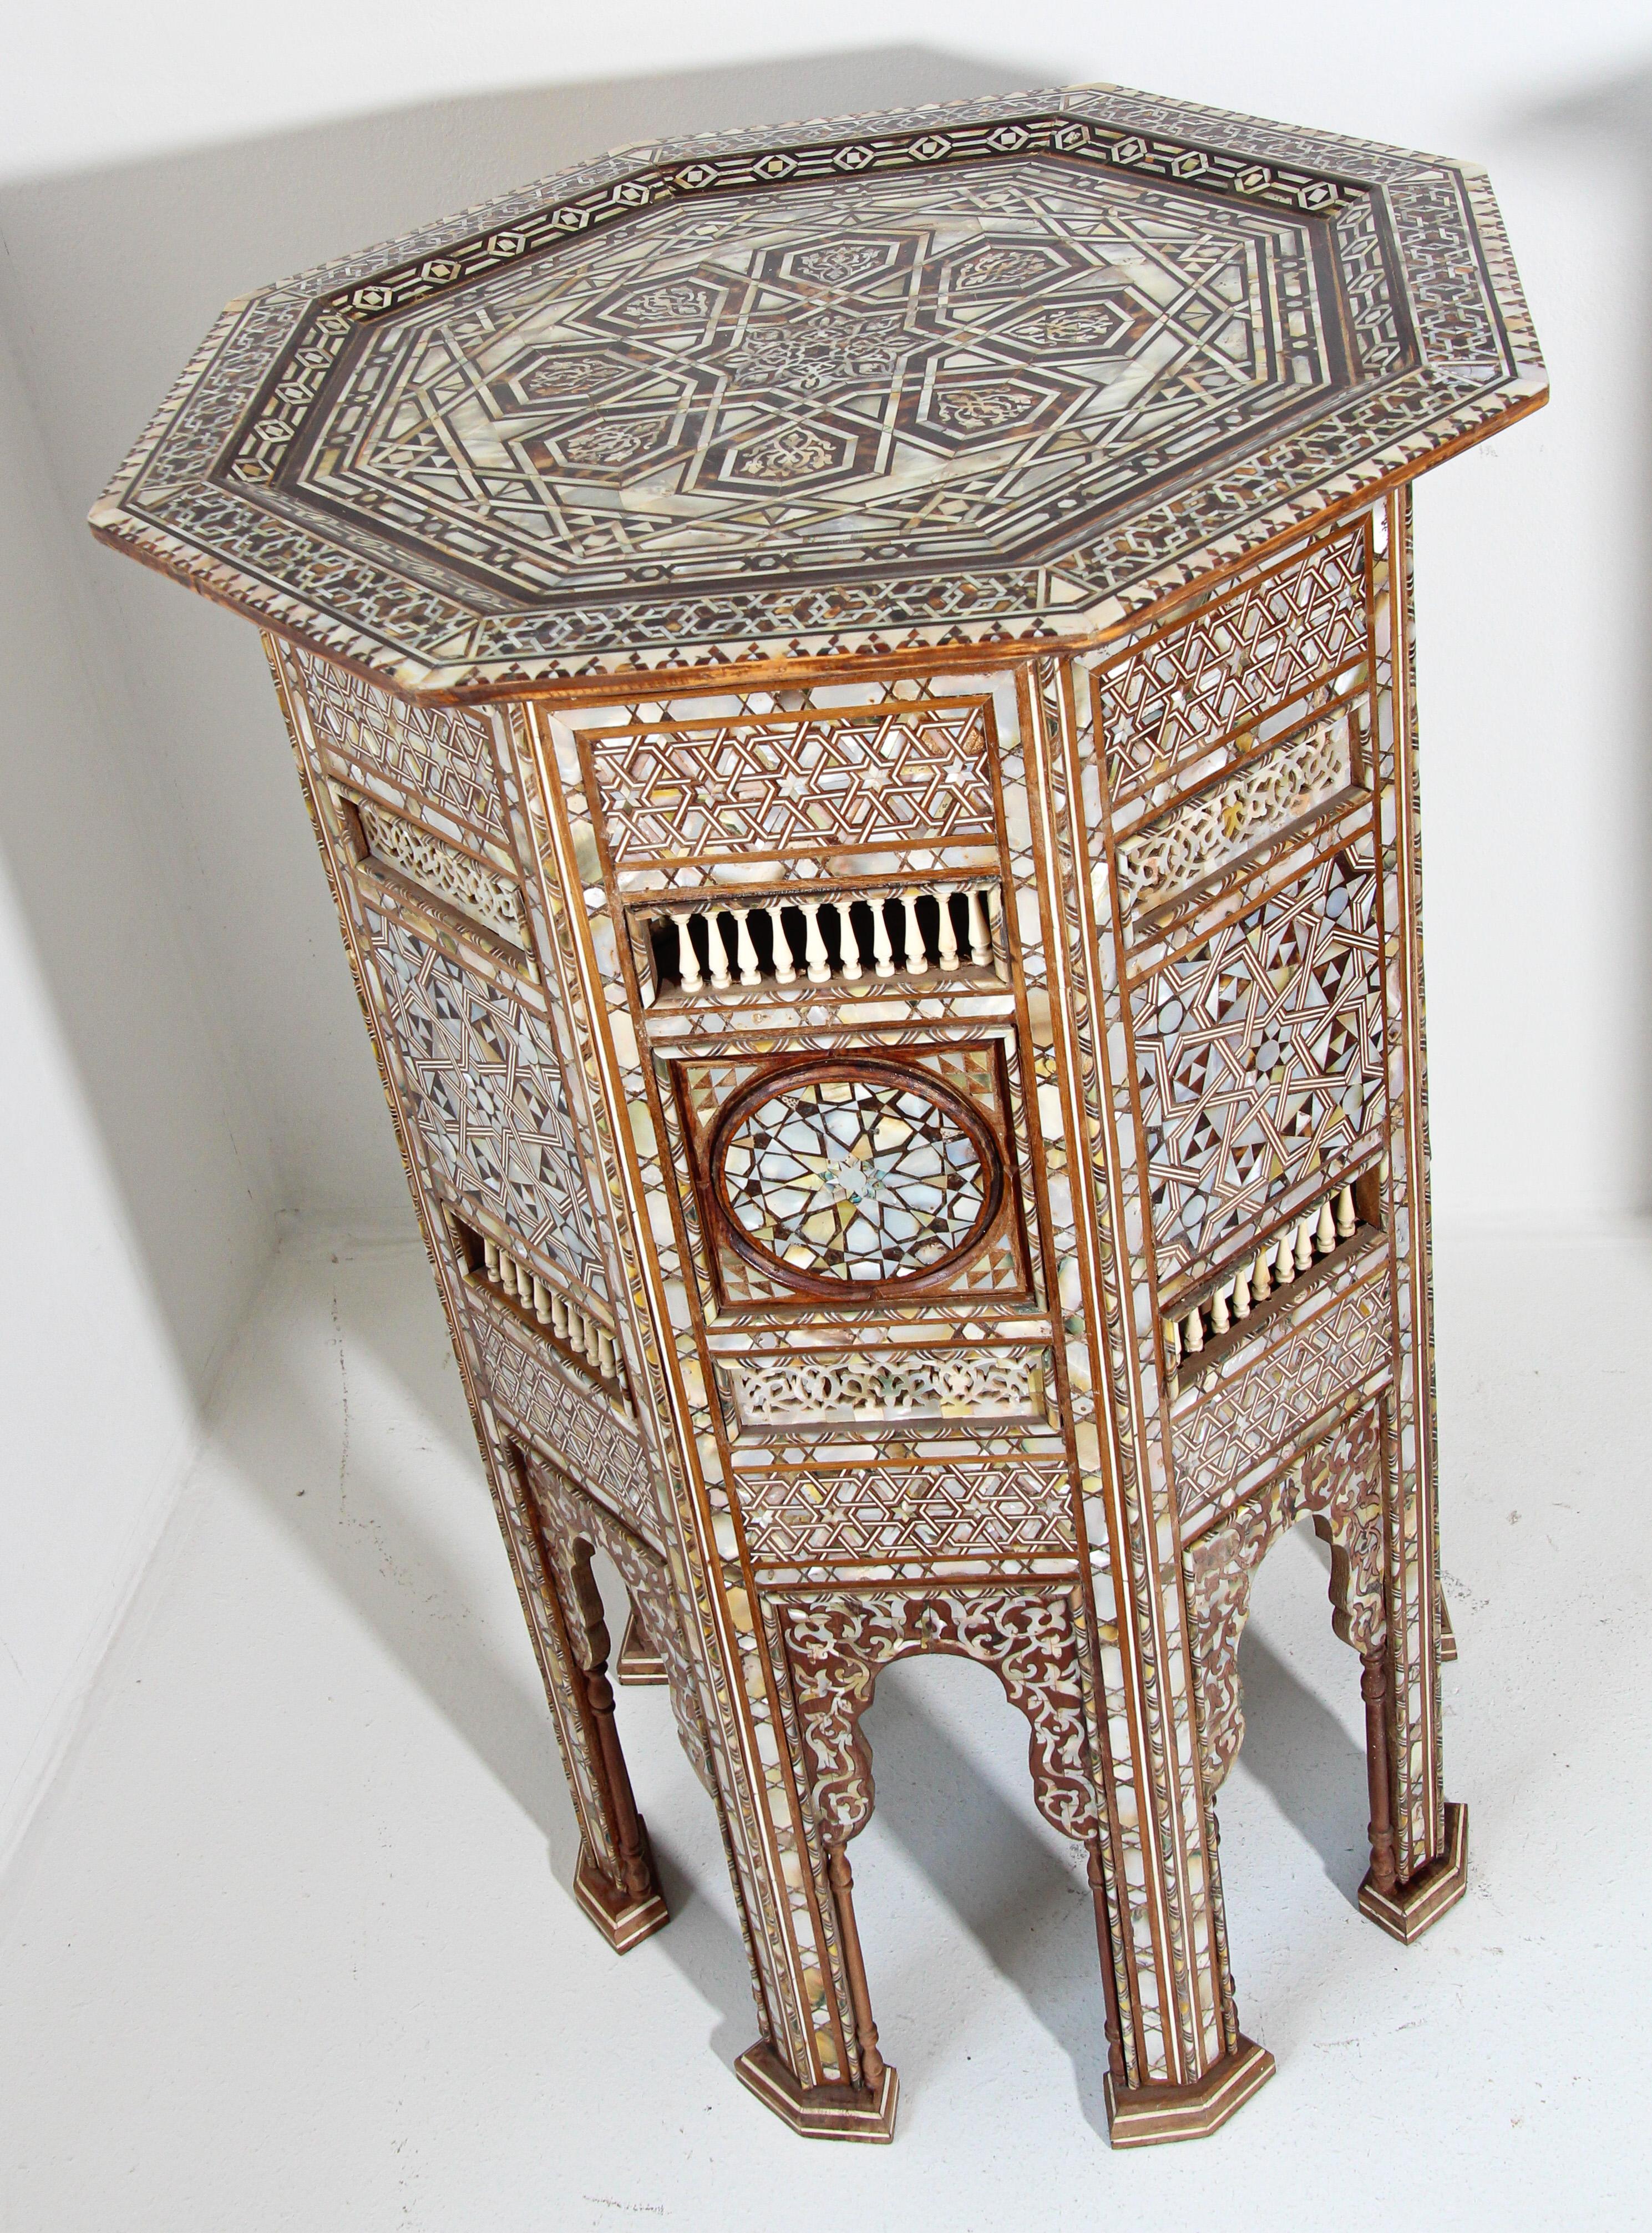 Turkish Moorish Middle Eastern Large Pedestal Tables Inlaid with Shell, 19th C. For Sale